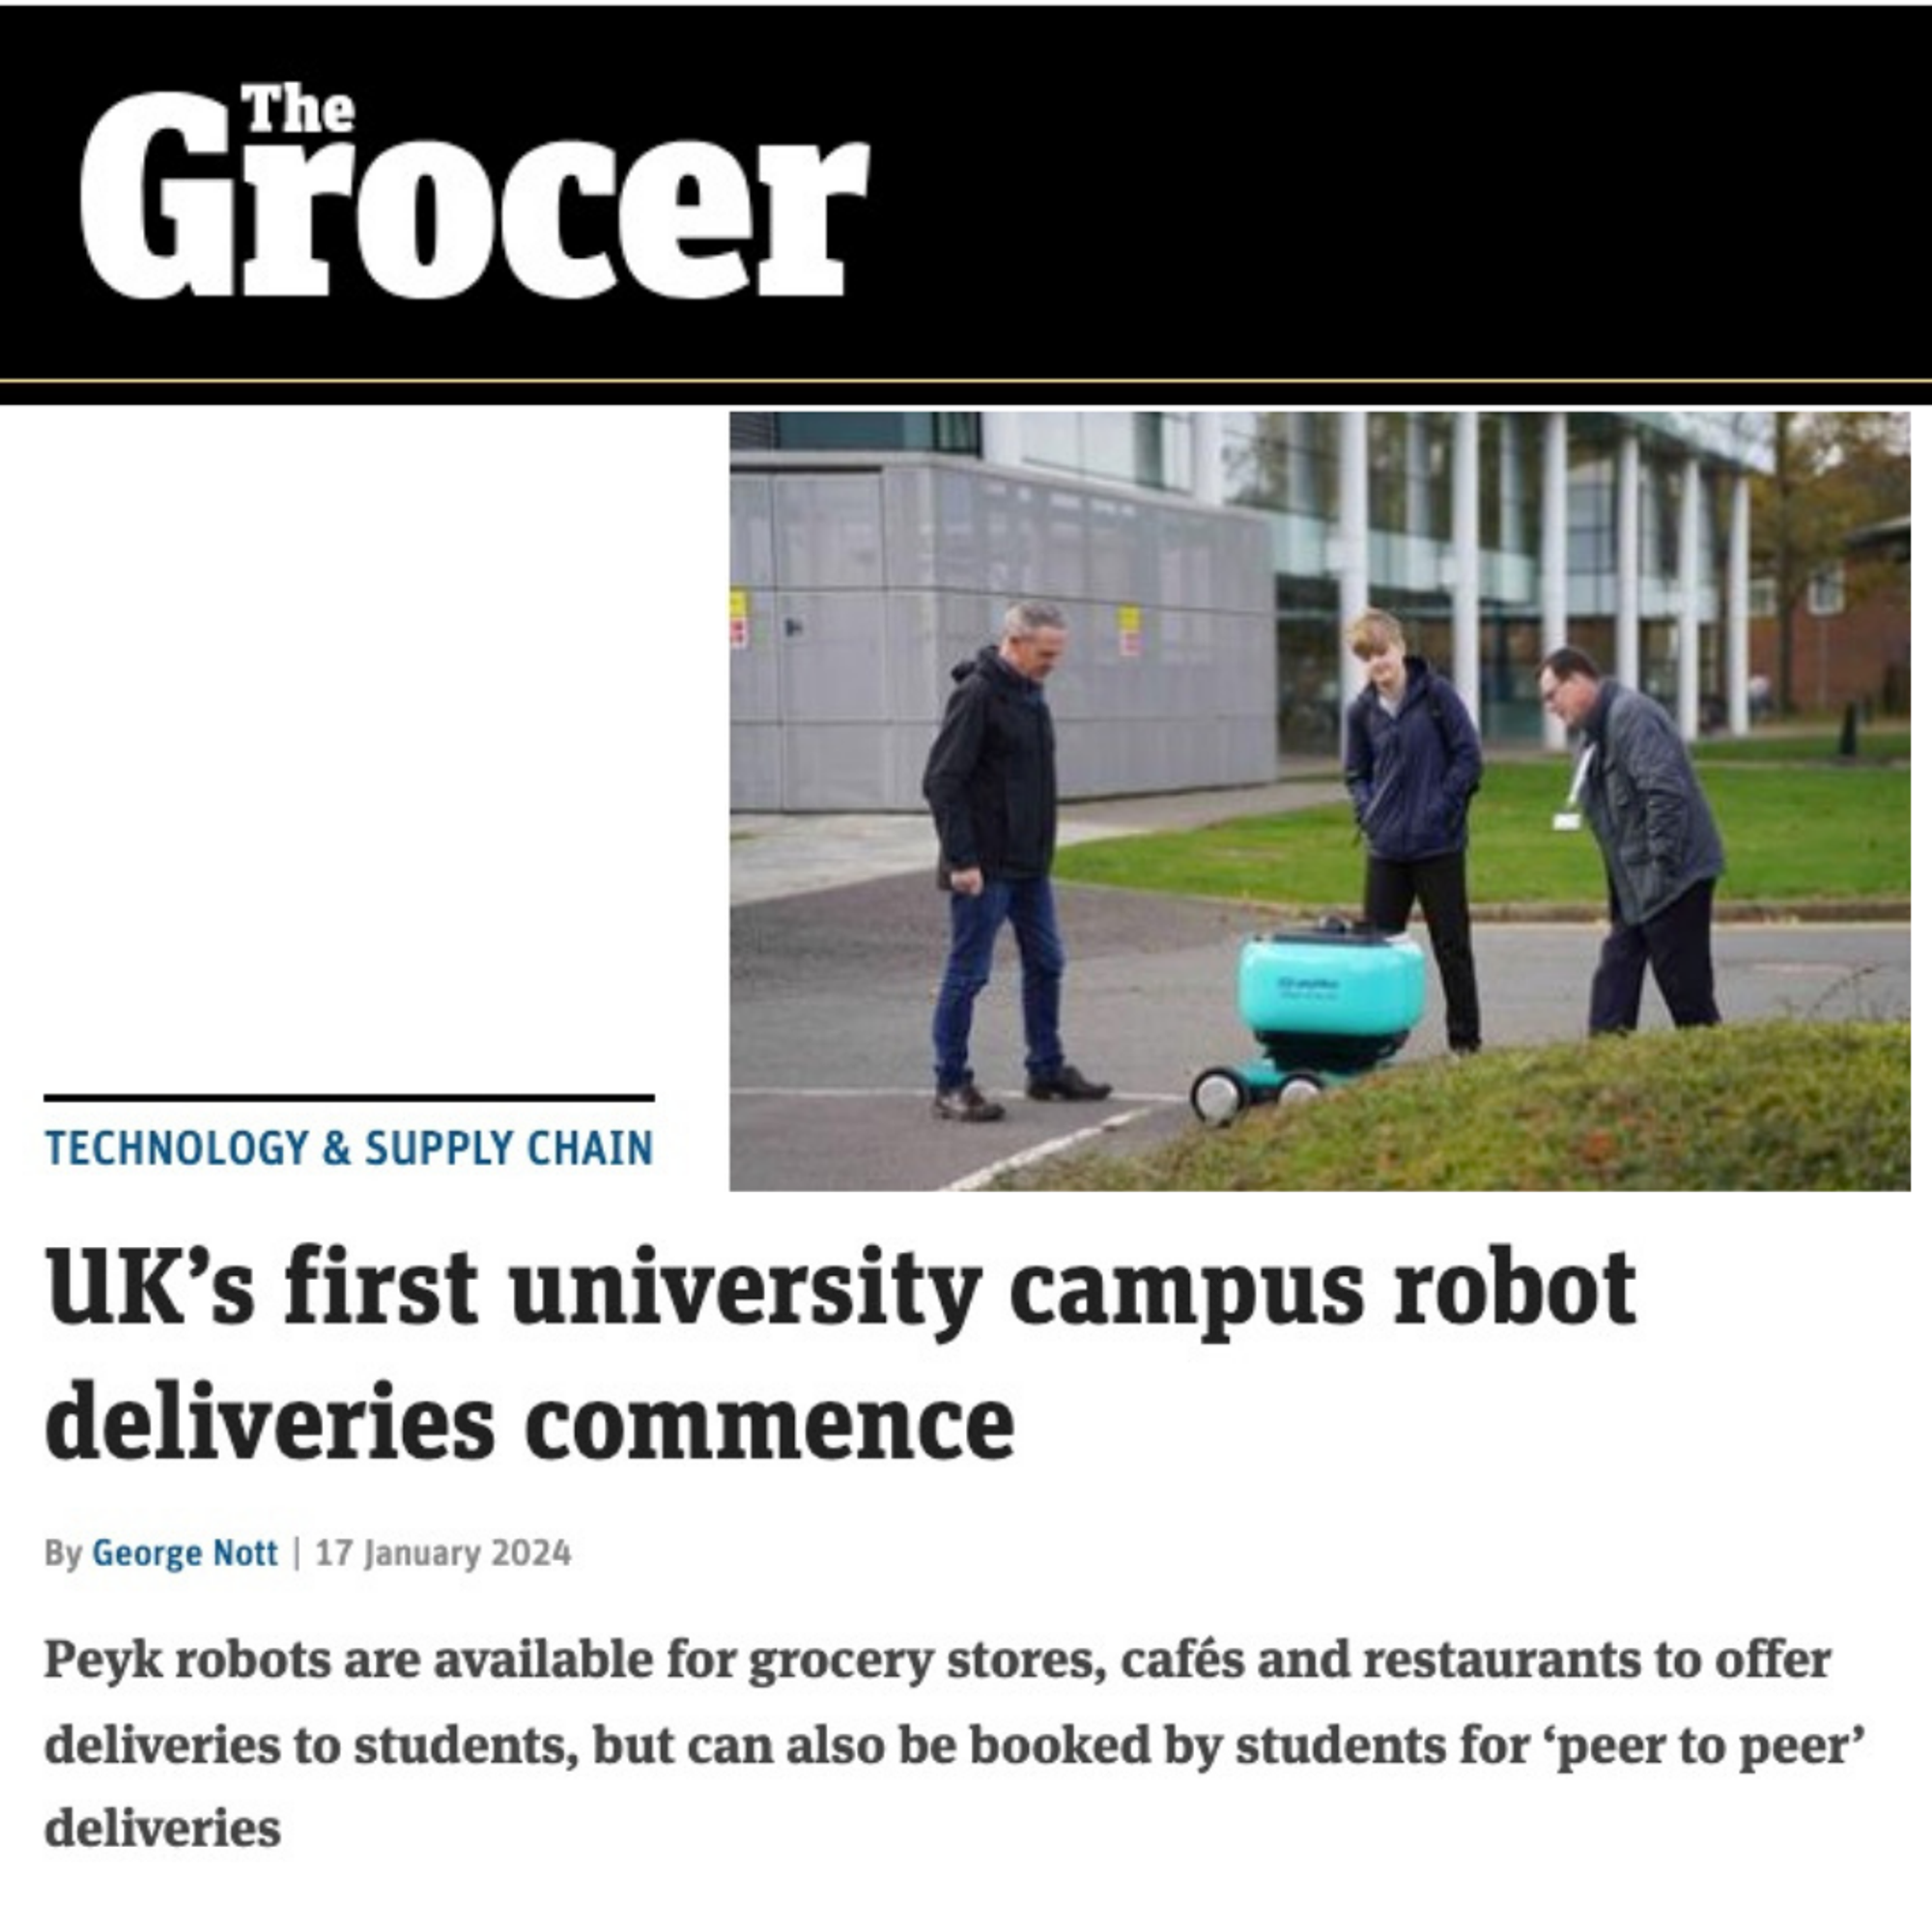 https://www.thegrocer.co.uk/technology-and-supply-chain/uks-first-university-campus-robot-deliveries-commence/687219.article